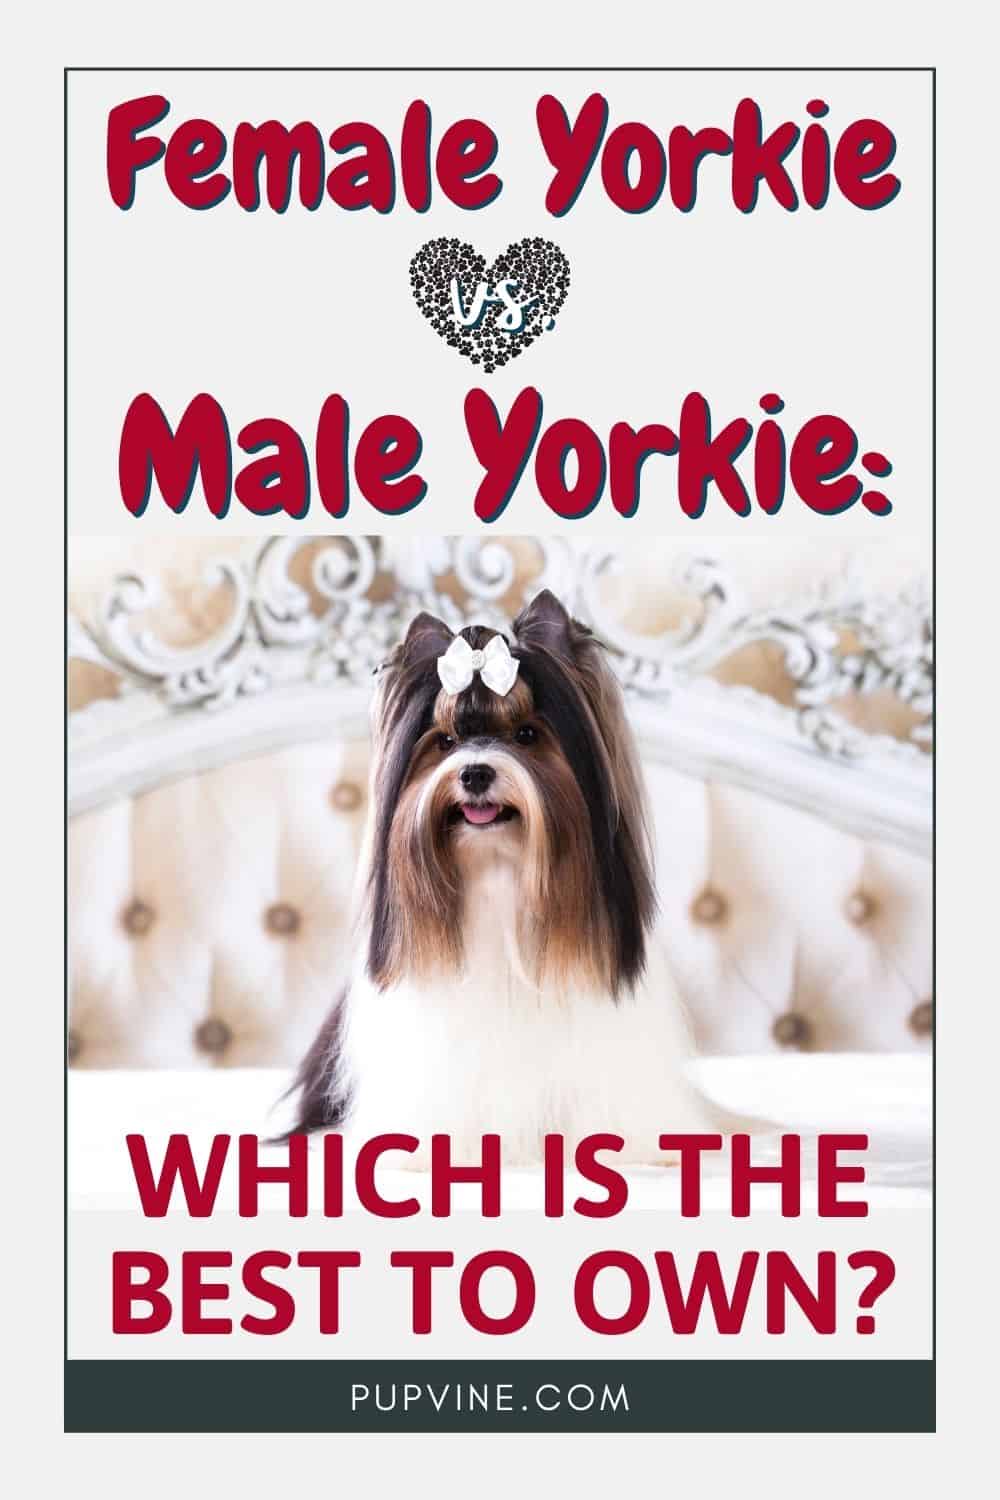 Female Yorkie Vs. Male Yorkie: Which Is The Best To Own?